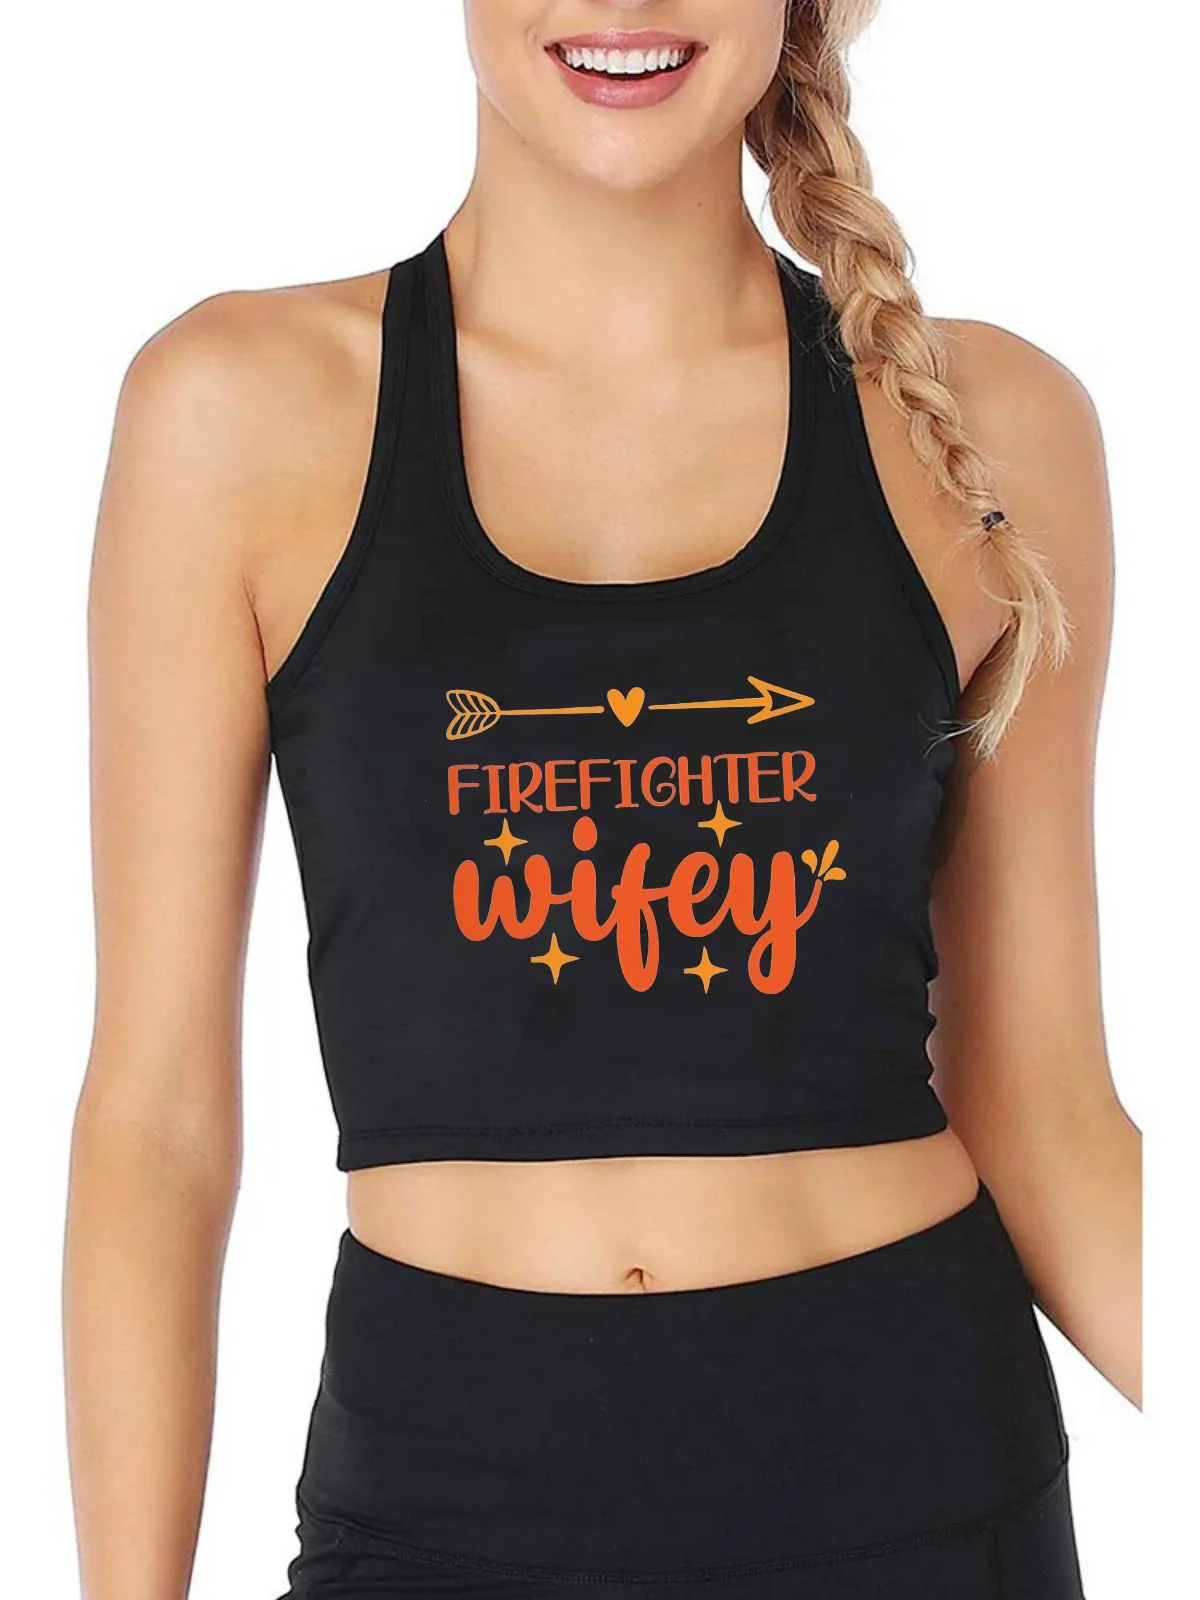 

Firefighter Wifey Design Breathable Slim Fit Tank Tops Hotwife Sexy Flirty Crop Top Women's Yoga Sports Fitness Camisole